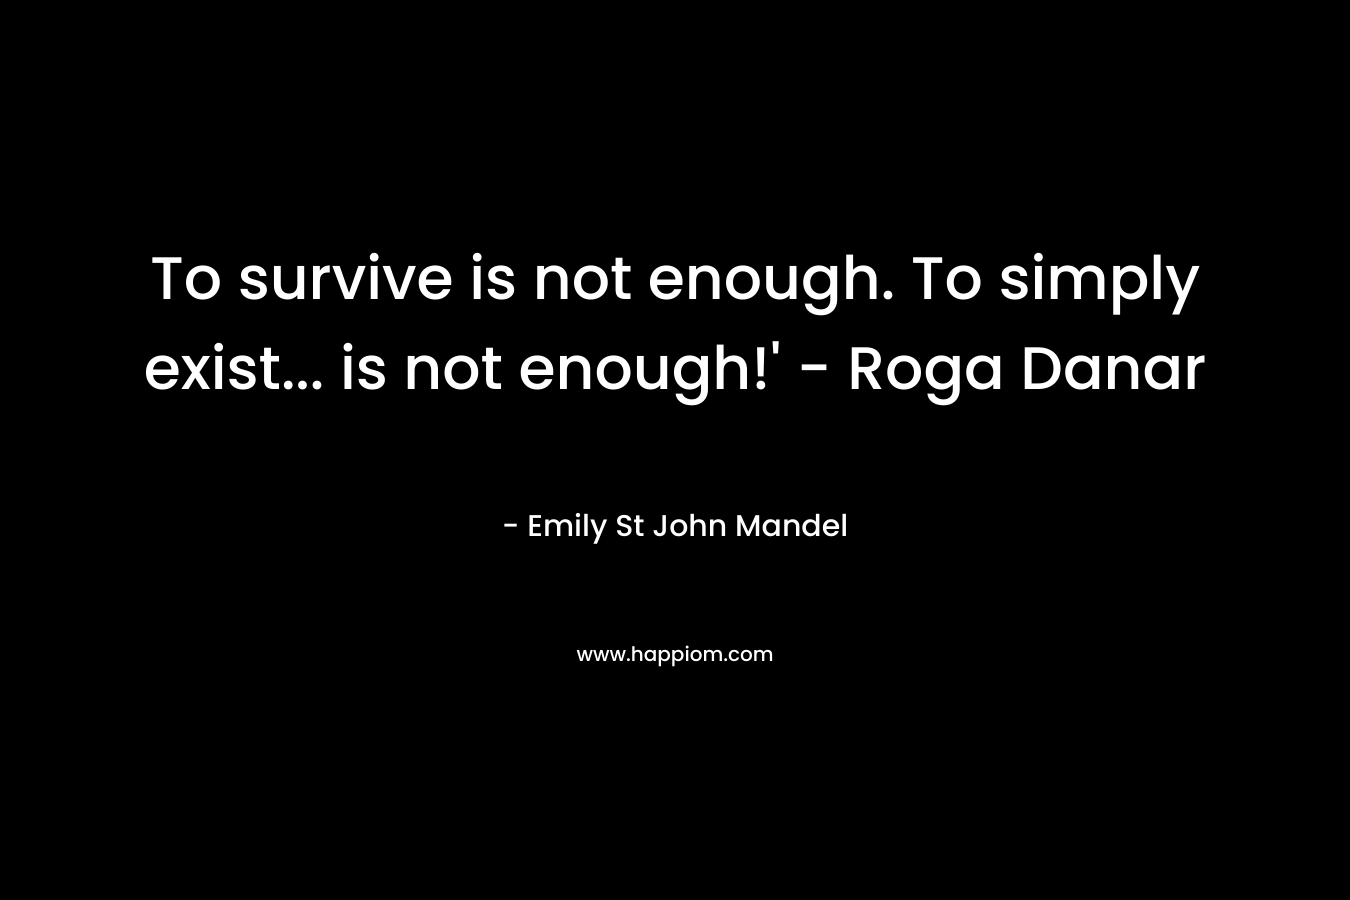 To survive is not enough. To simply exist... is not enough!' - Roga Danar